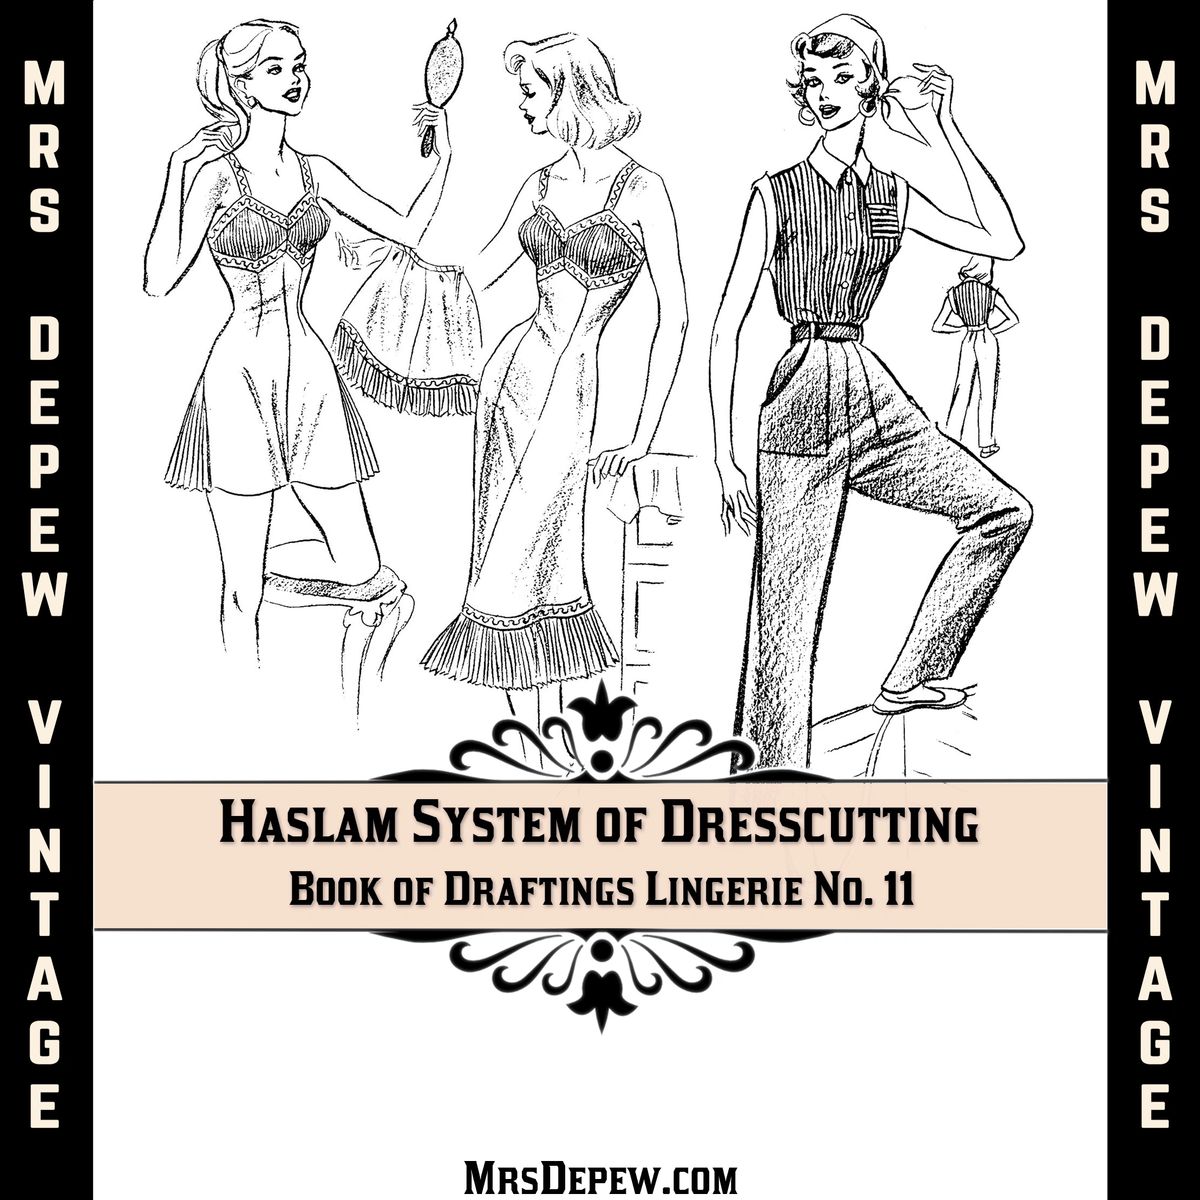 Haslam Dresscutting Book of Draftings Lingerie No. 11 1950s Vintage Sewing  Pattern E-book with 30 Patterns - INSTANT DOWNLOAD